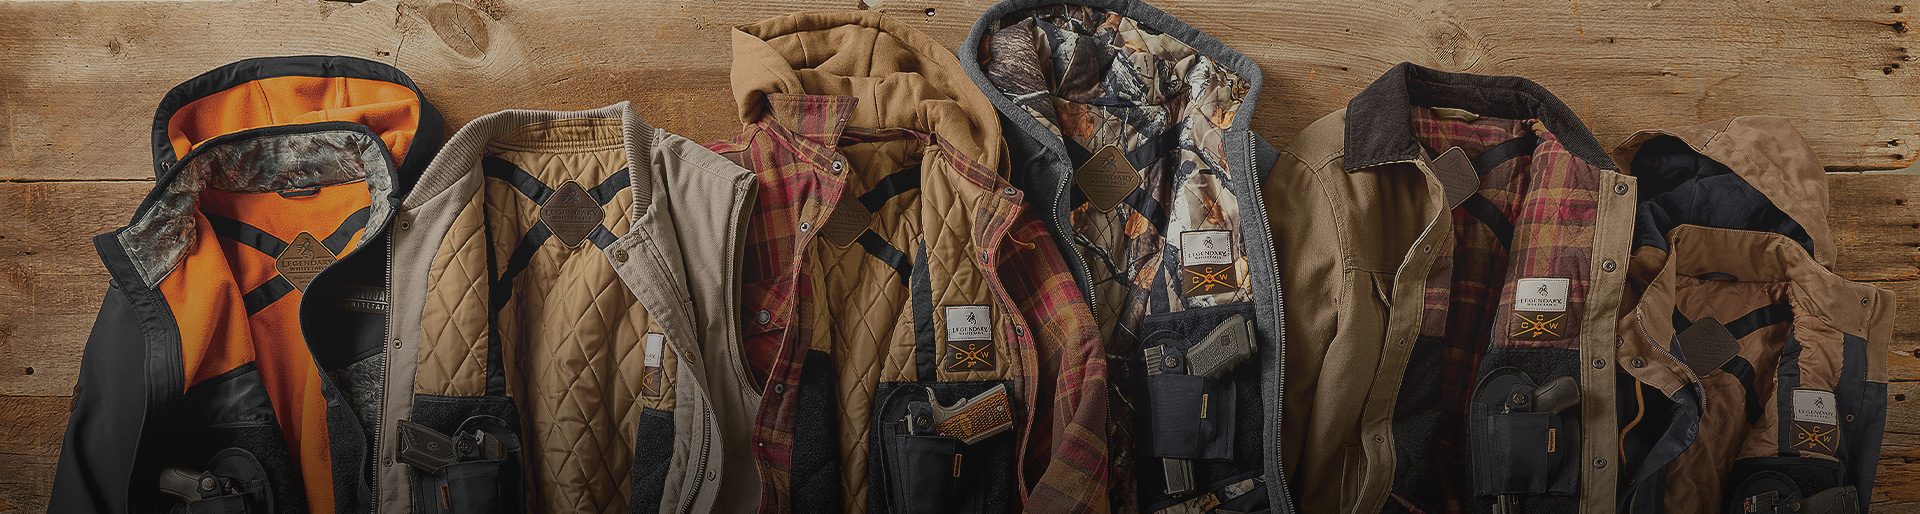 A collection of Legendary Whitetails' Concealed Carry Wear.